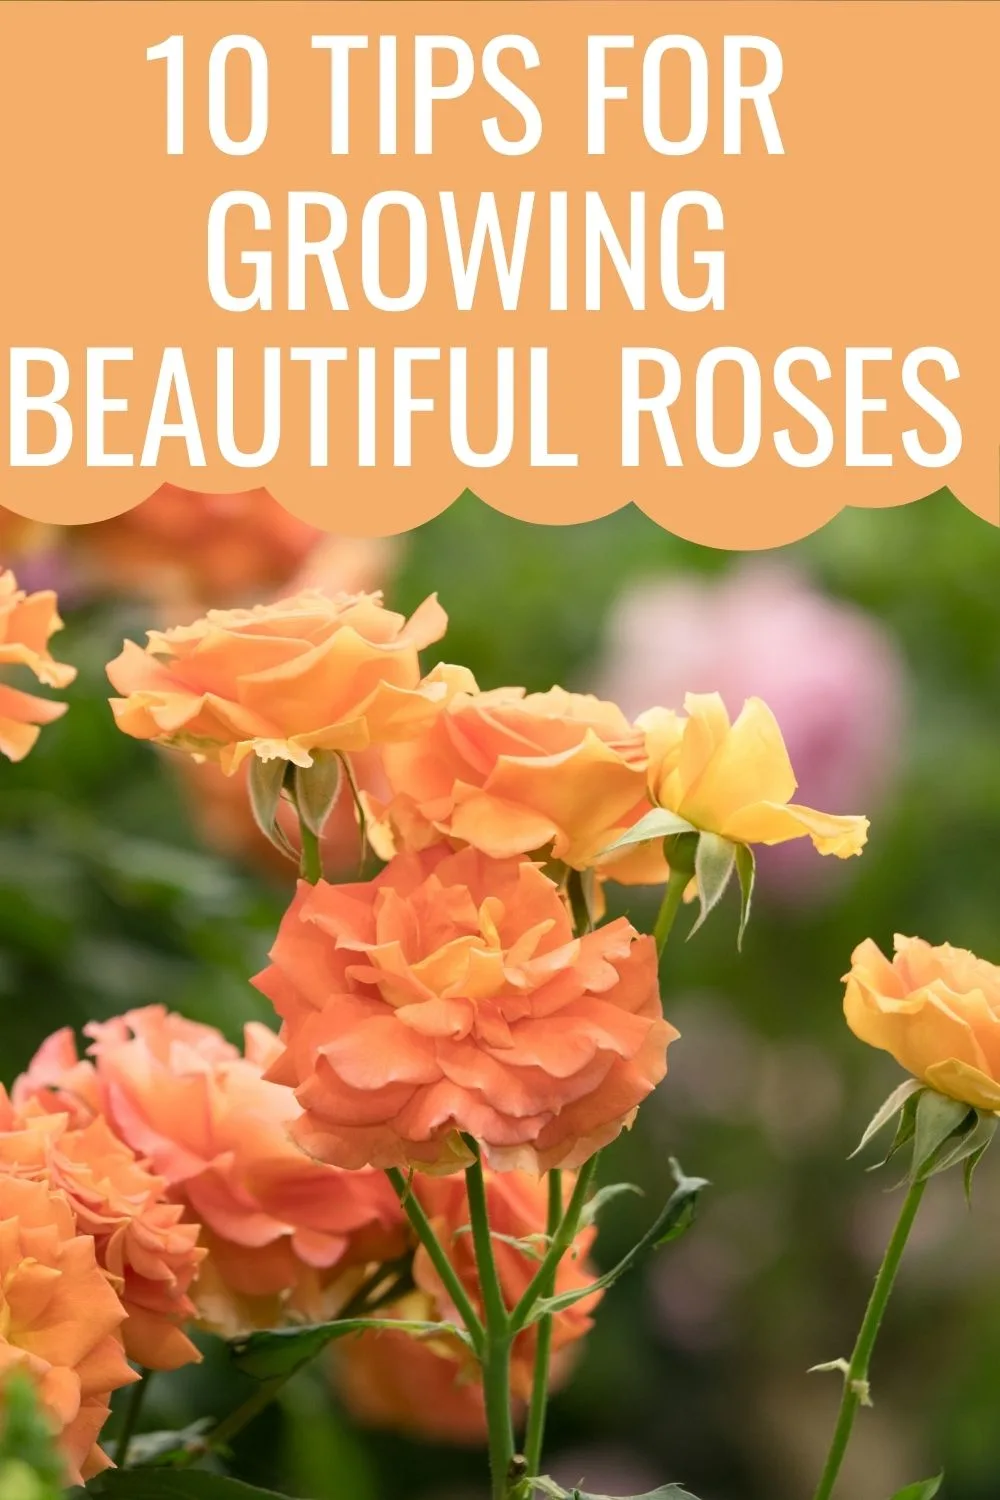 10 tips for growing beautiful roses